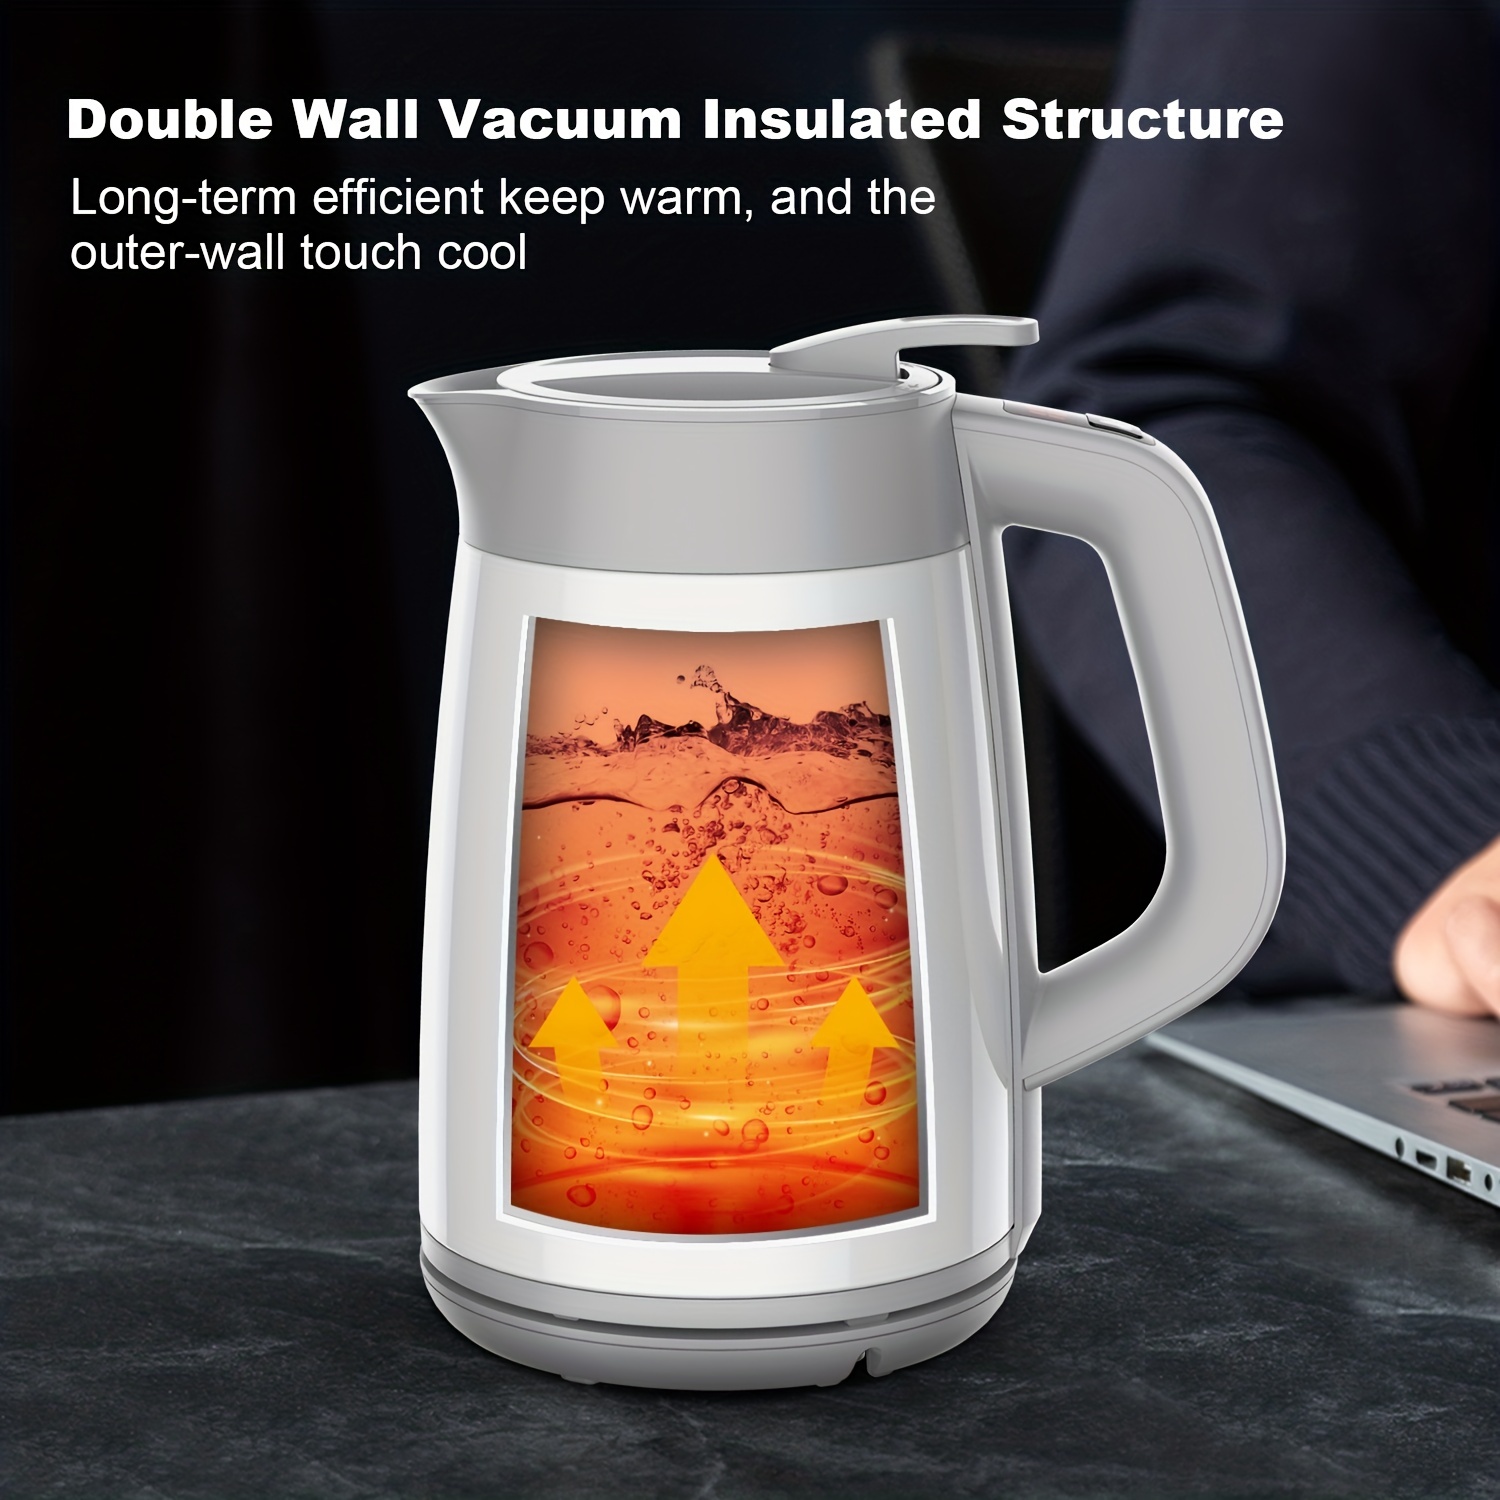 Why Insulated Vacuum Kettle Can Keep Water Warm?